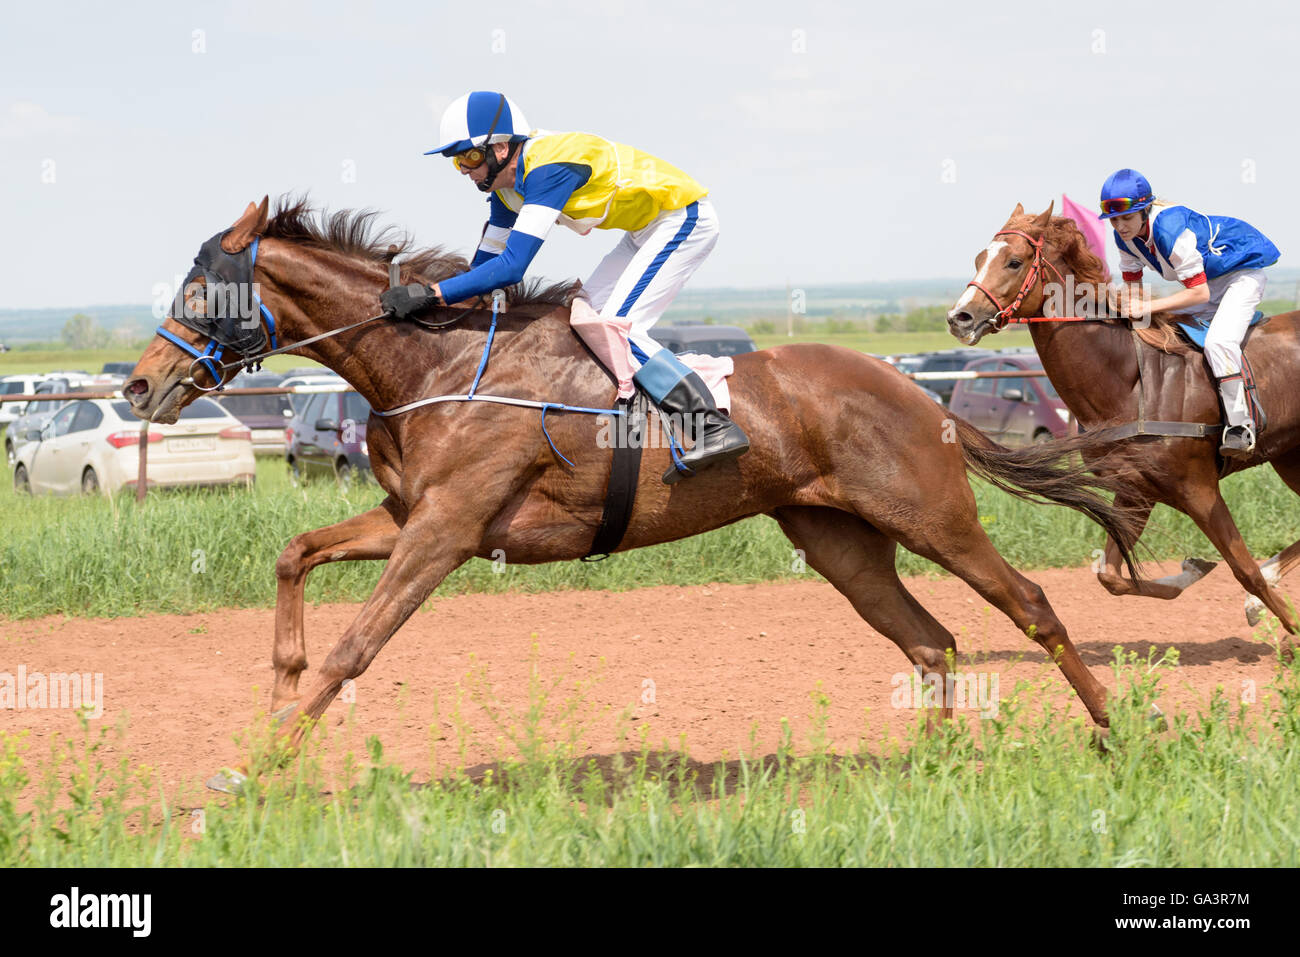 Galloping horses and their riders at a horse racing event in Summer Stock Photo